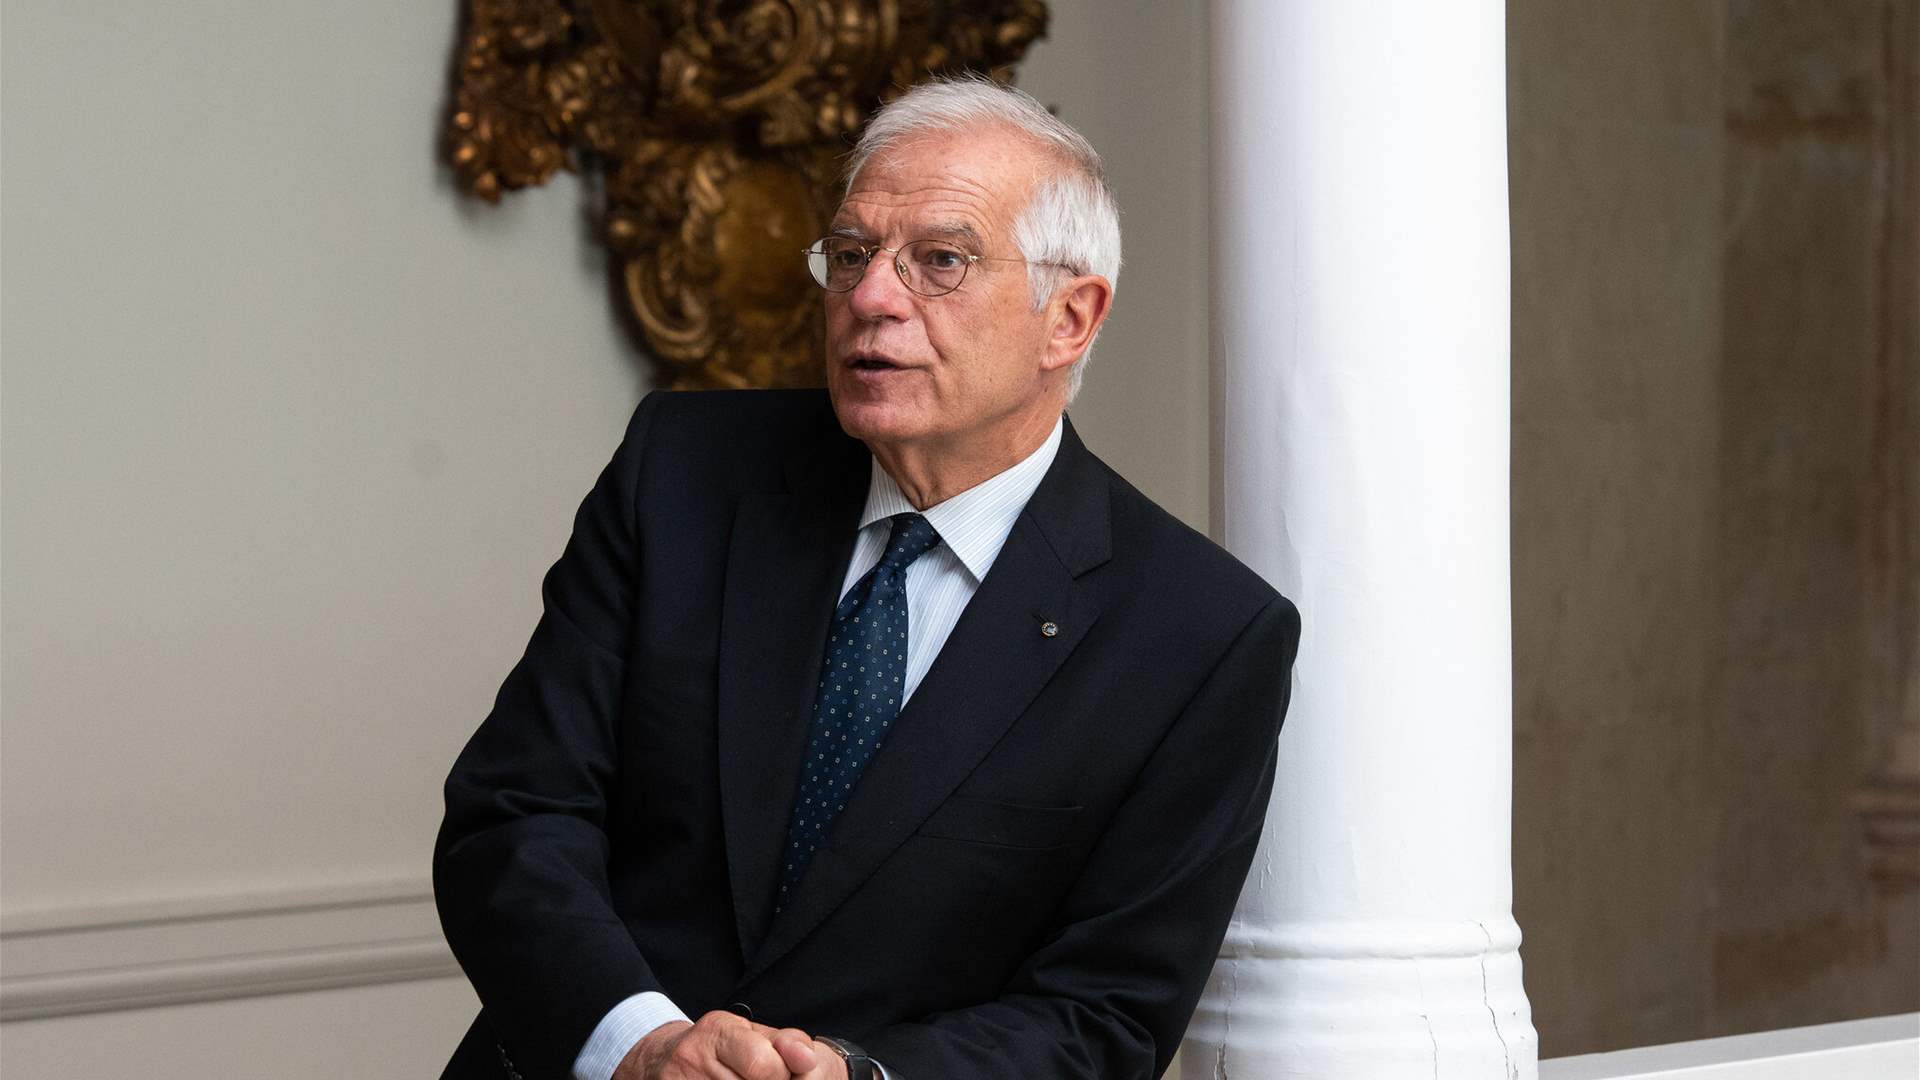 Borrell to visit Lebanon to discuss the situation on the borders with Israel